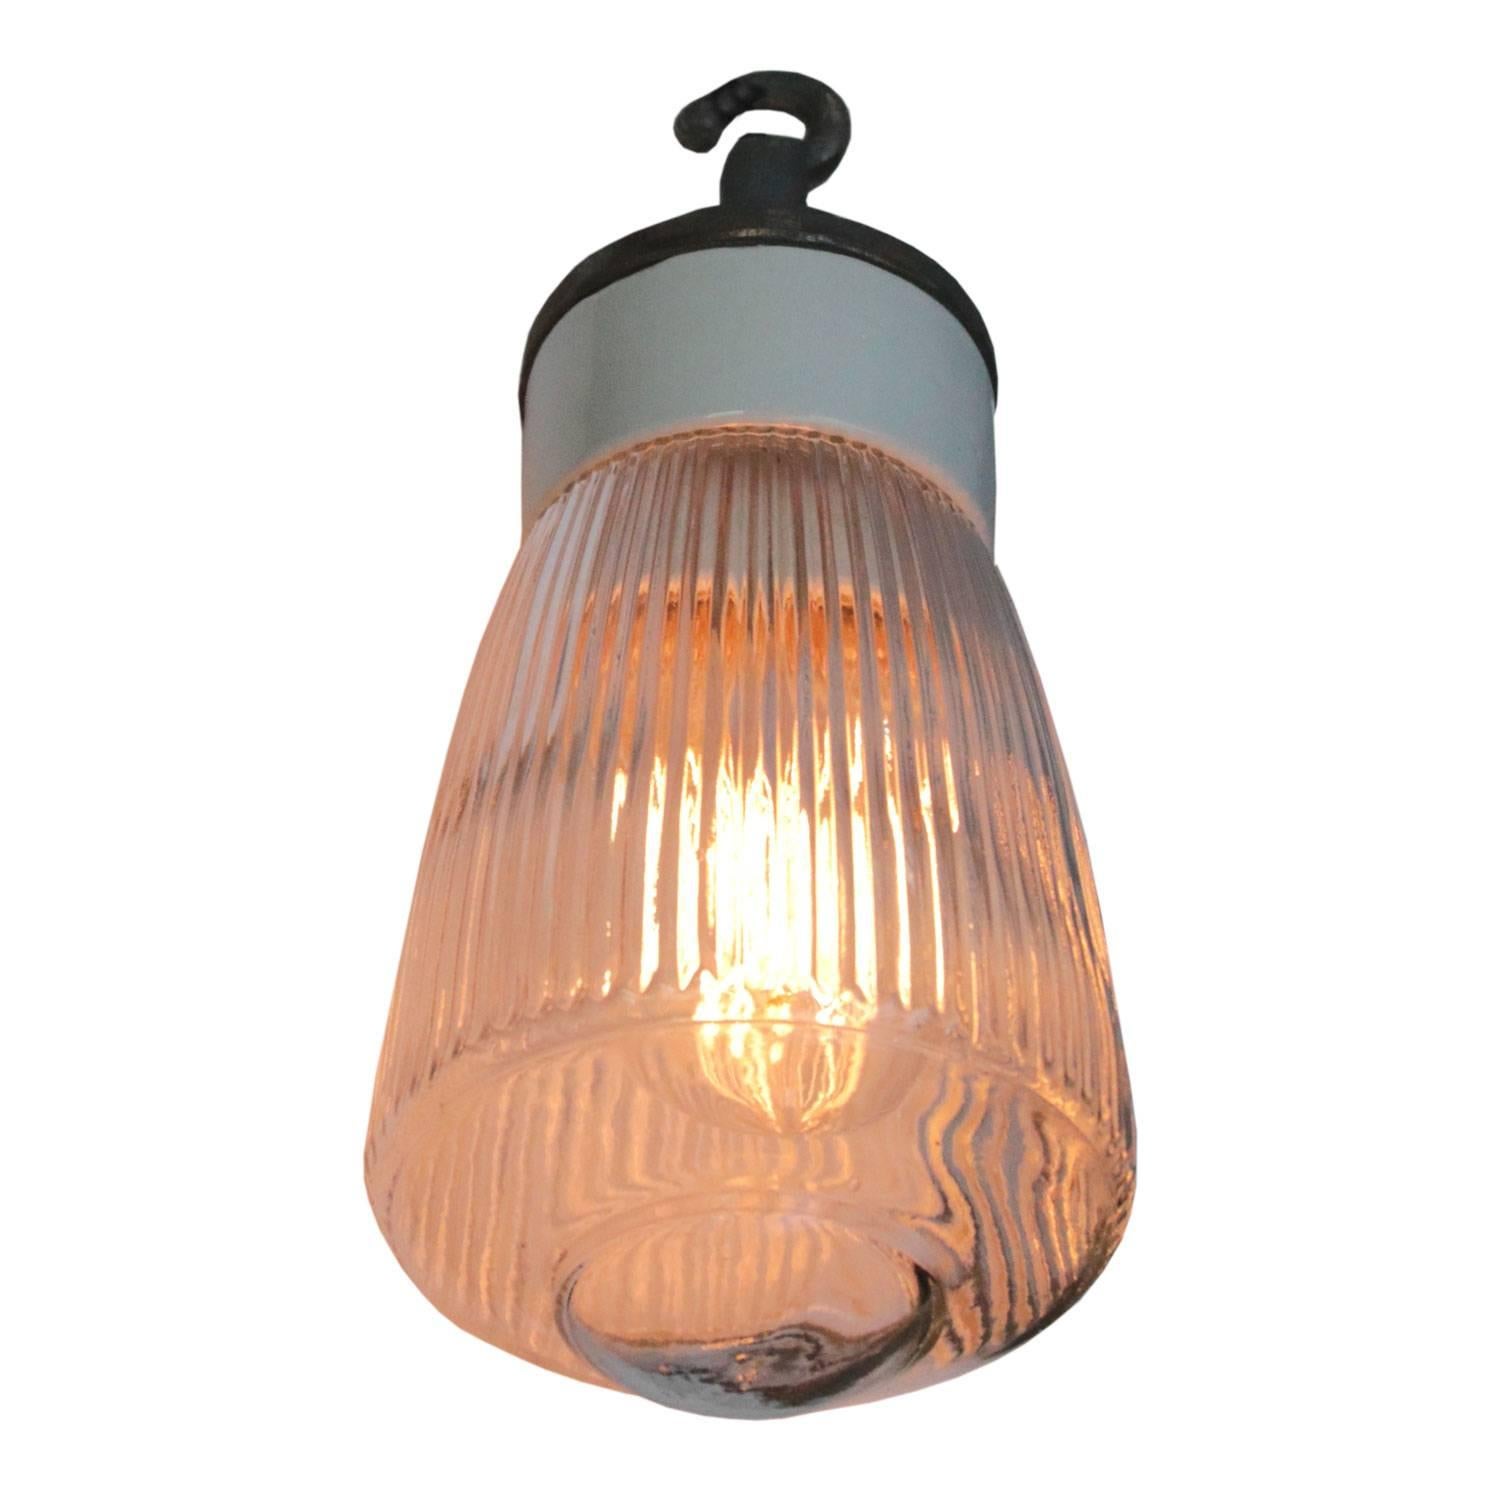 Porcelain industrial hanging lamp. White porcelain. Cast iron and clear glass.
Two conductors. No ground.

Weight: 2.0 kg / 4.4 lb

All lamps have been made suitable by international standards for incandescent light bulbs, energy-efficient and LED